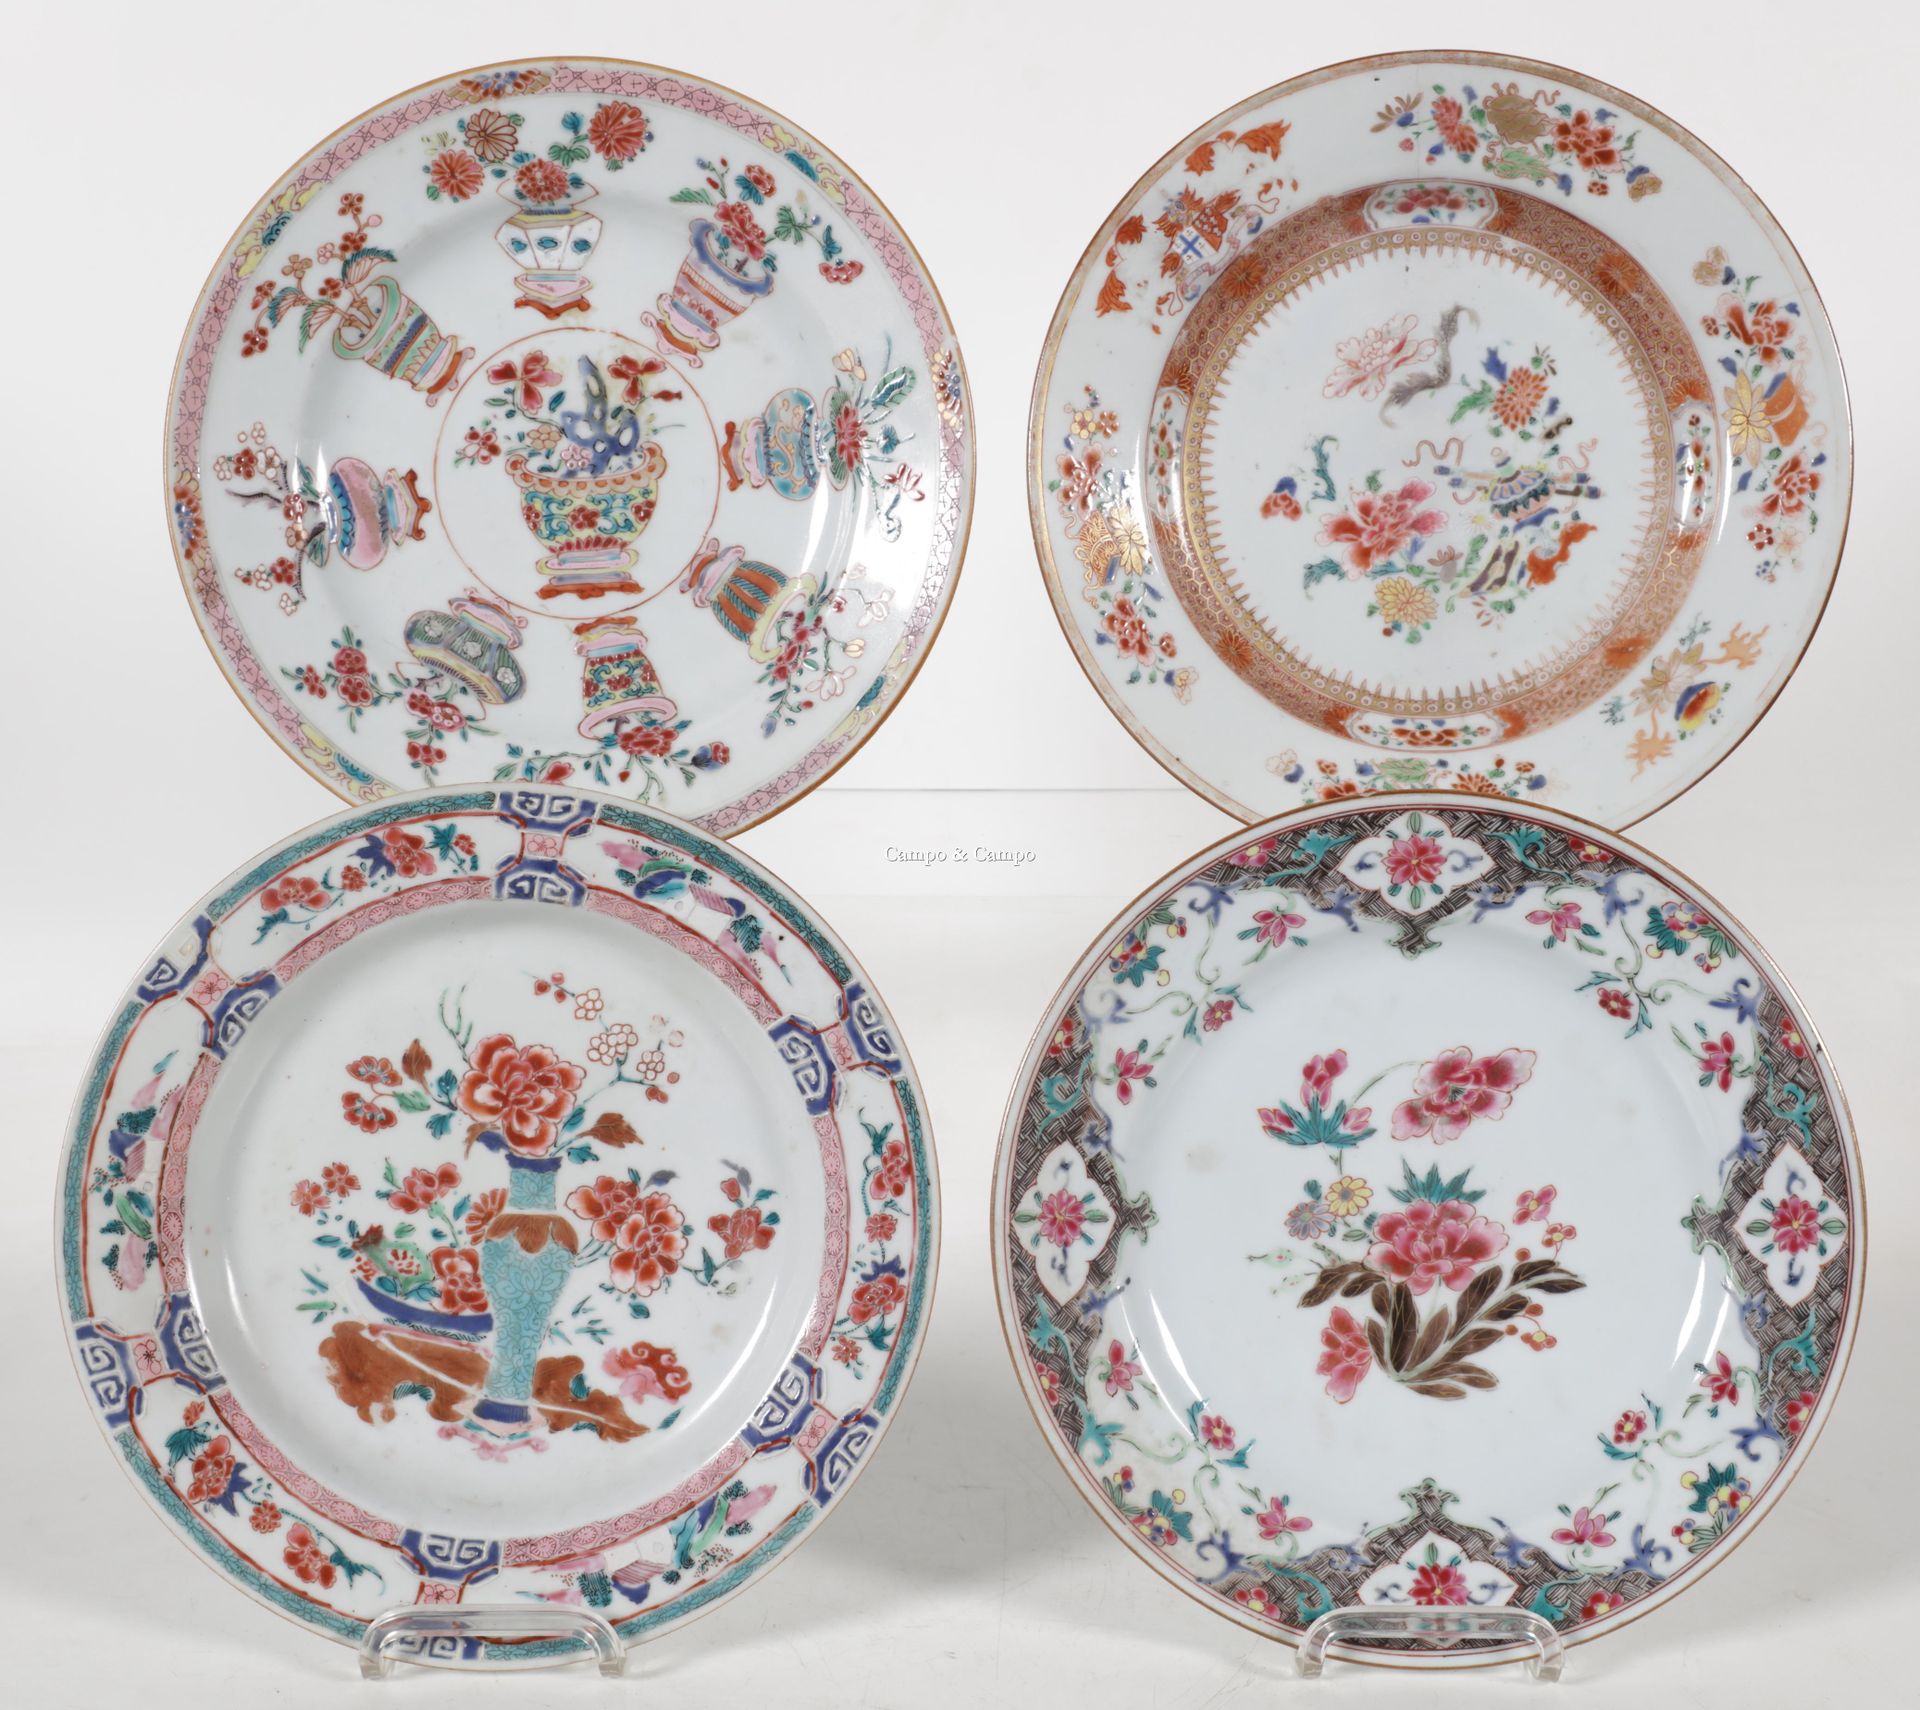 VARIA Suite of four porcelain plates of China with various decorations of the pi&hellip;